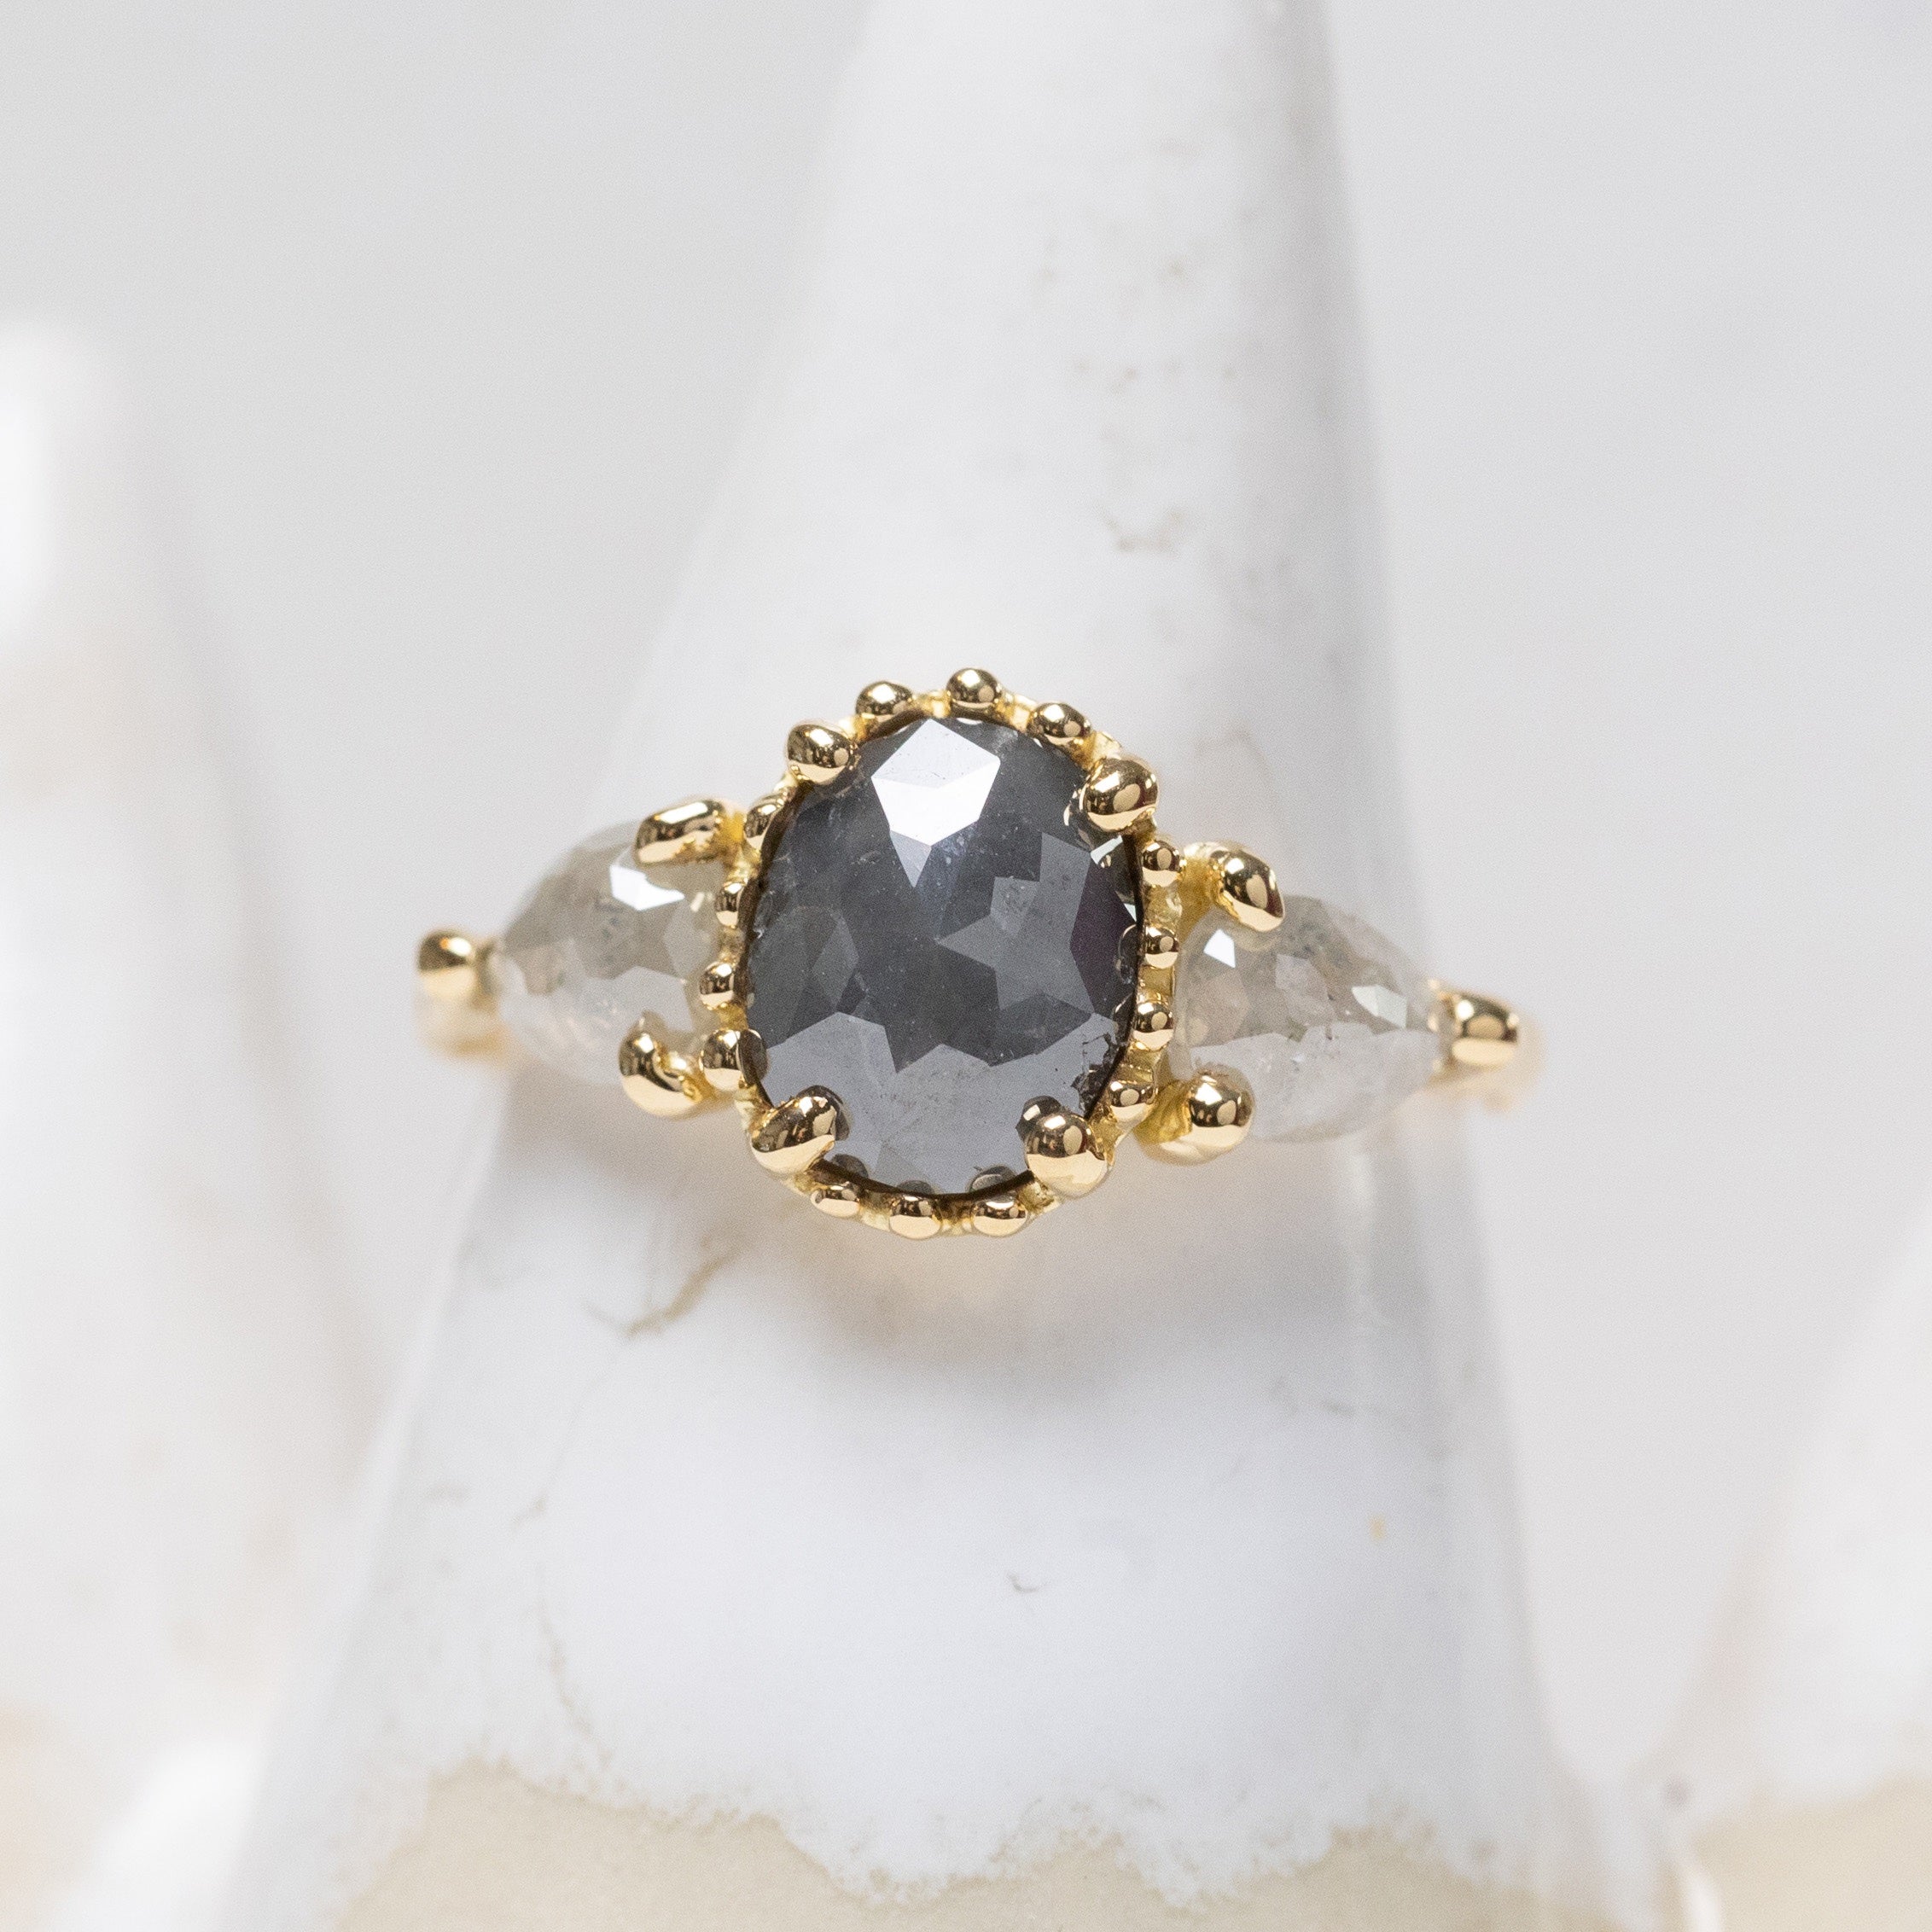 Oval Dark Gray and Pearly White Rustic Diamonds Ring - 2.47ct (18k)